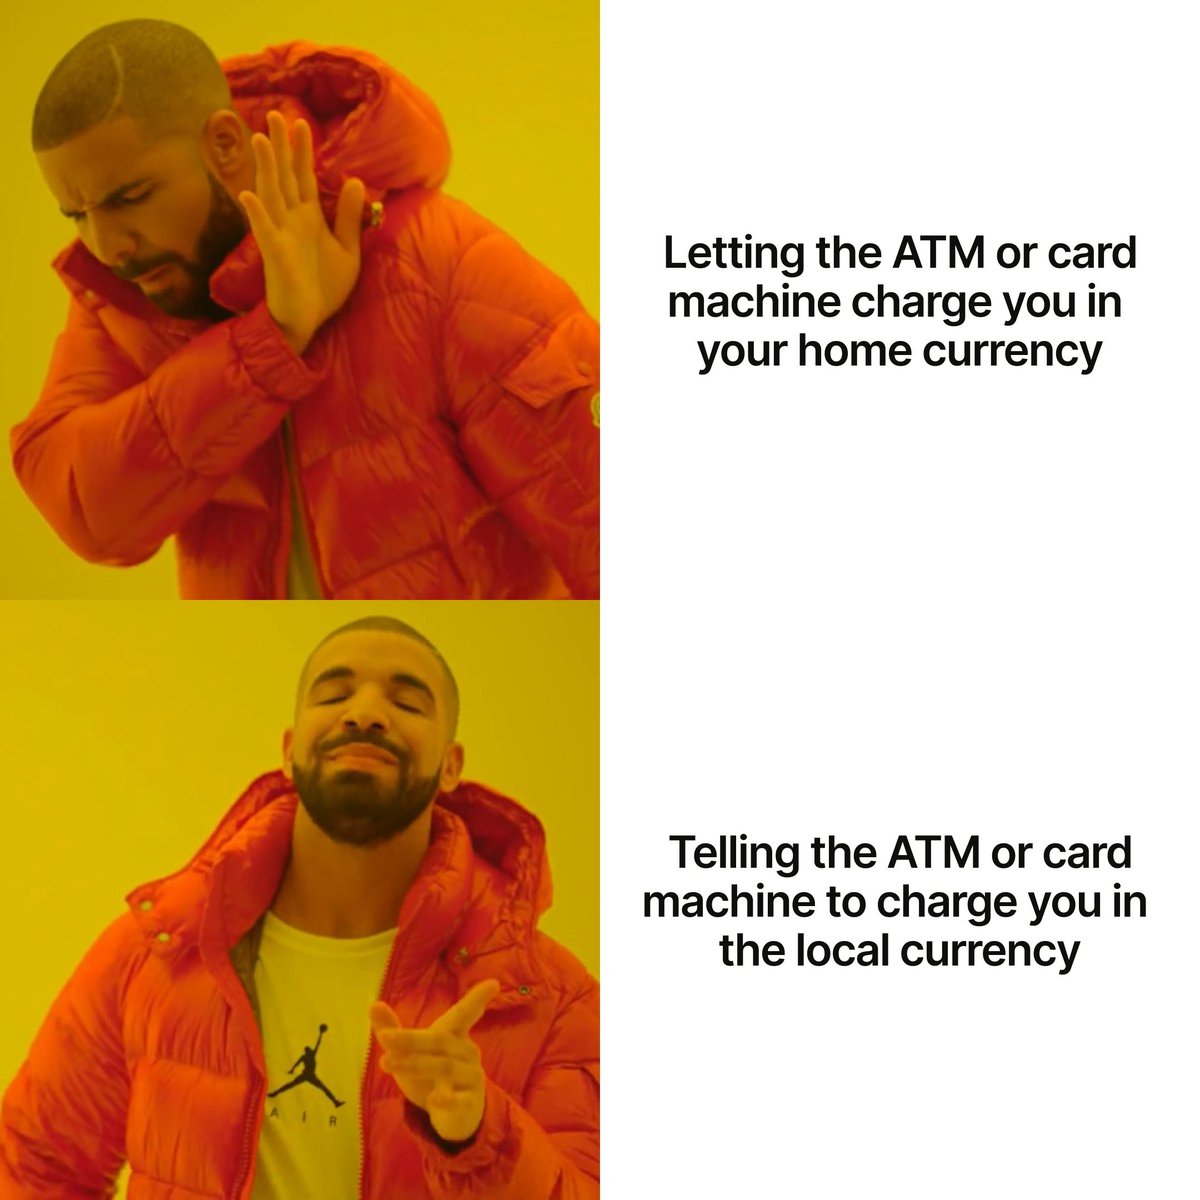 🚨 'This ATM offers conversion to your home currency' actually means 'Let foreign banks decide the exchange rate to charge you more' 🚨 Always use the local currency when you can to avoid hidden fees!